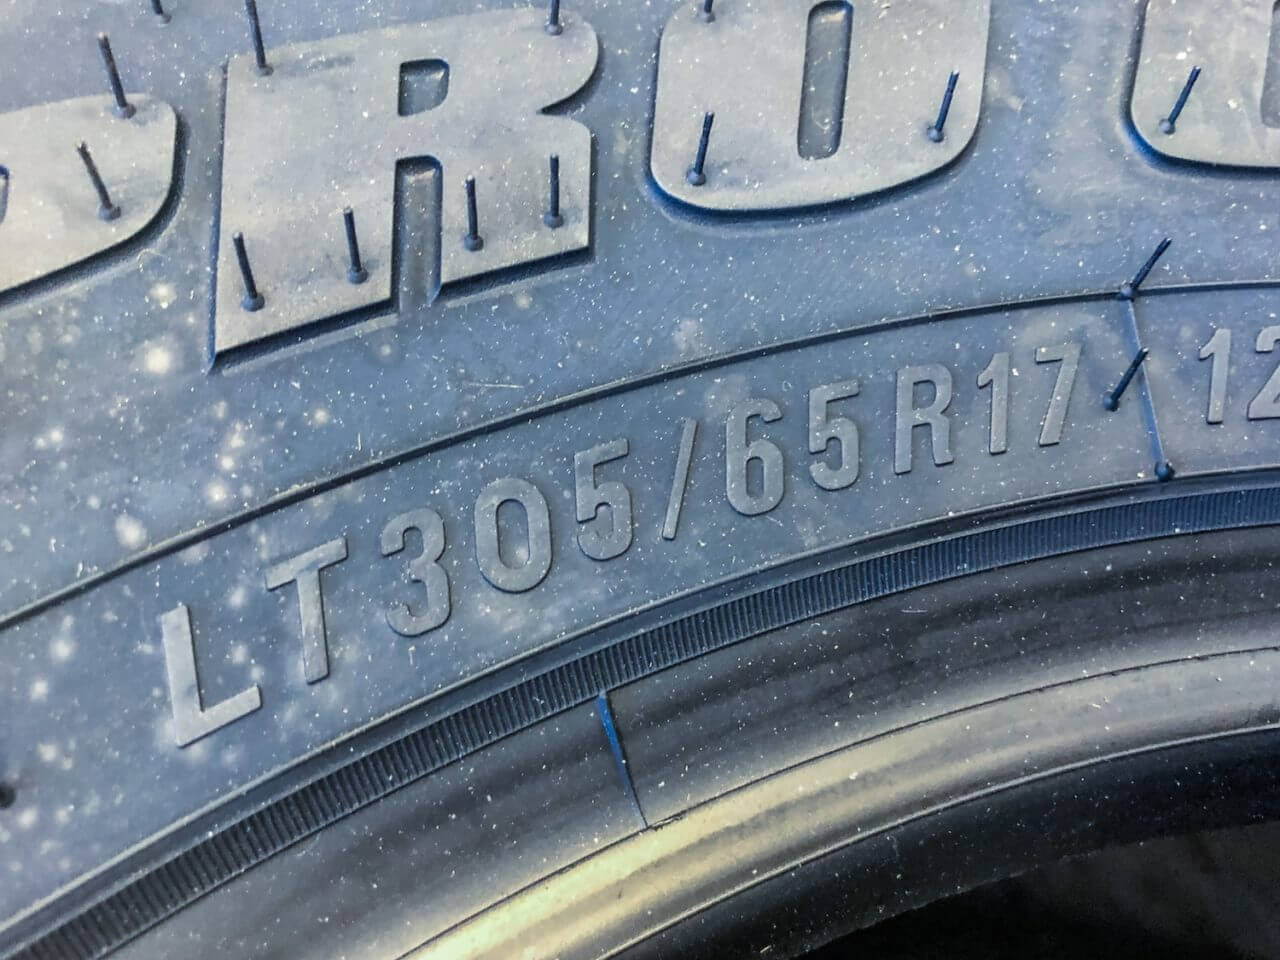 04 tire load rating